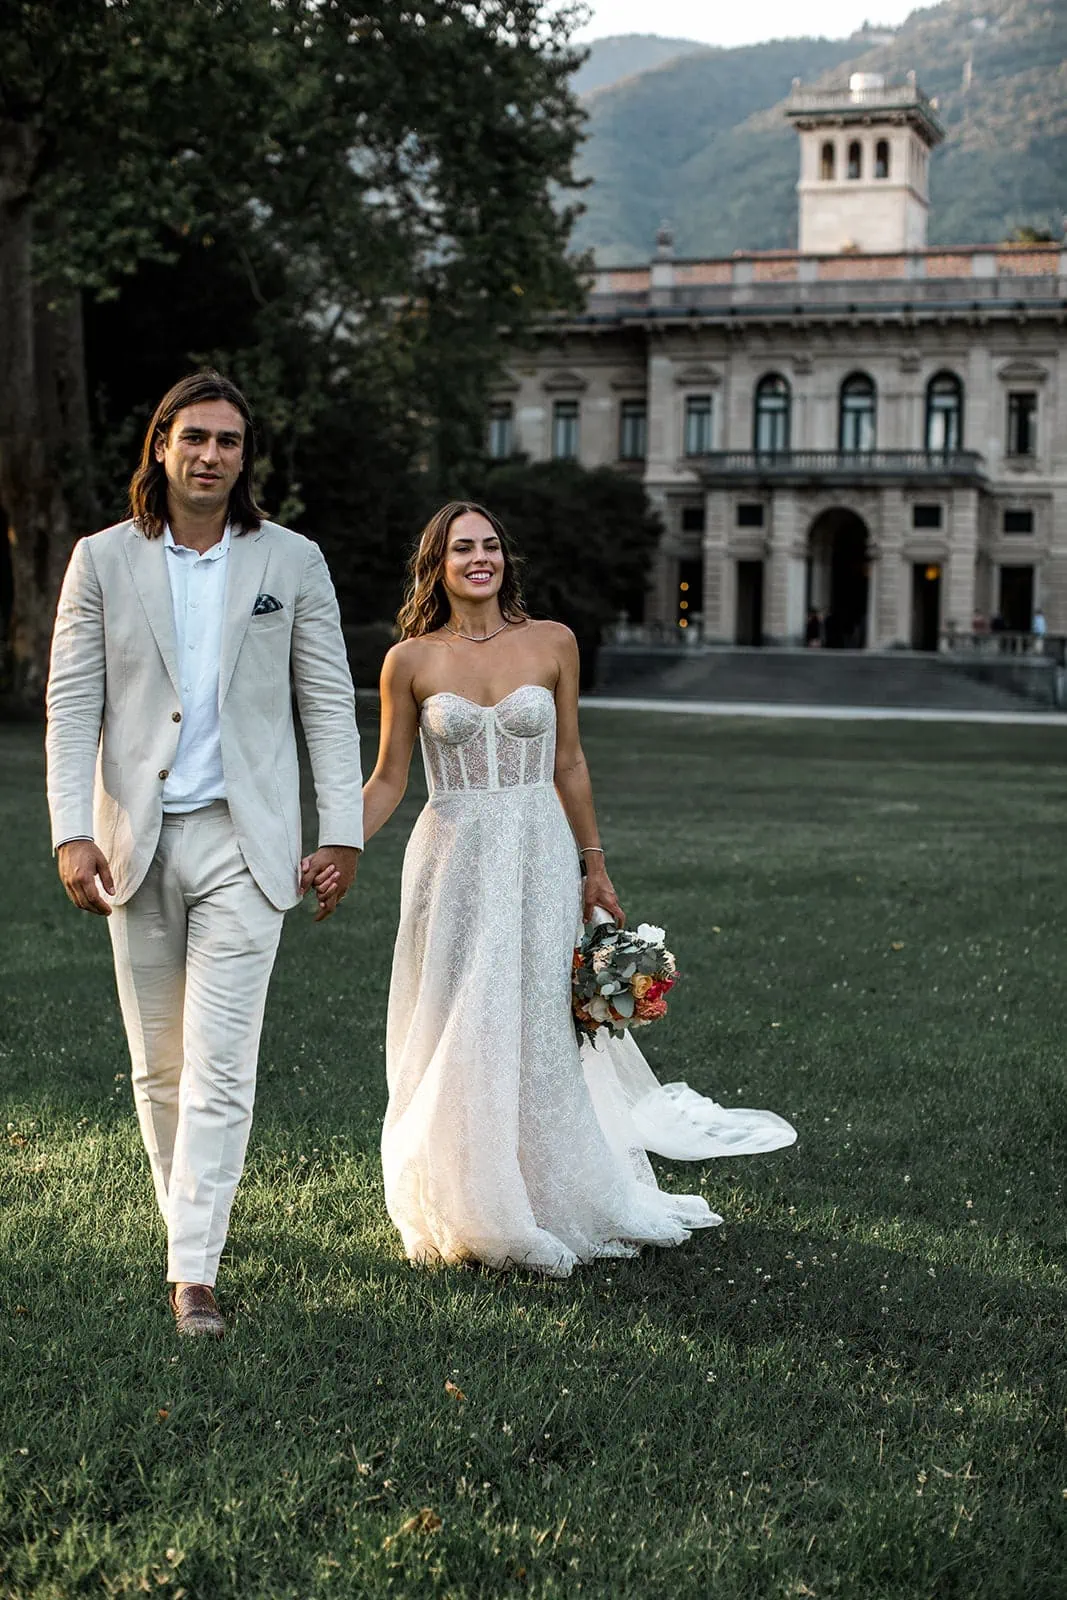 Bride and groom walking in field with Villa Erba in background